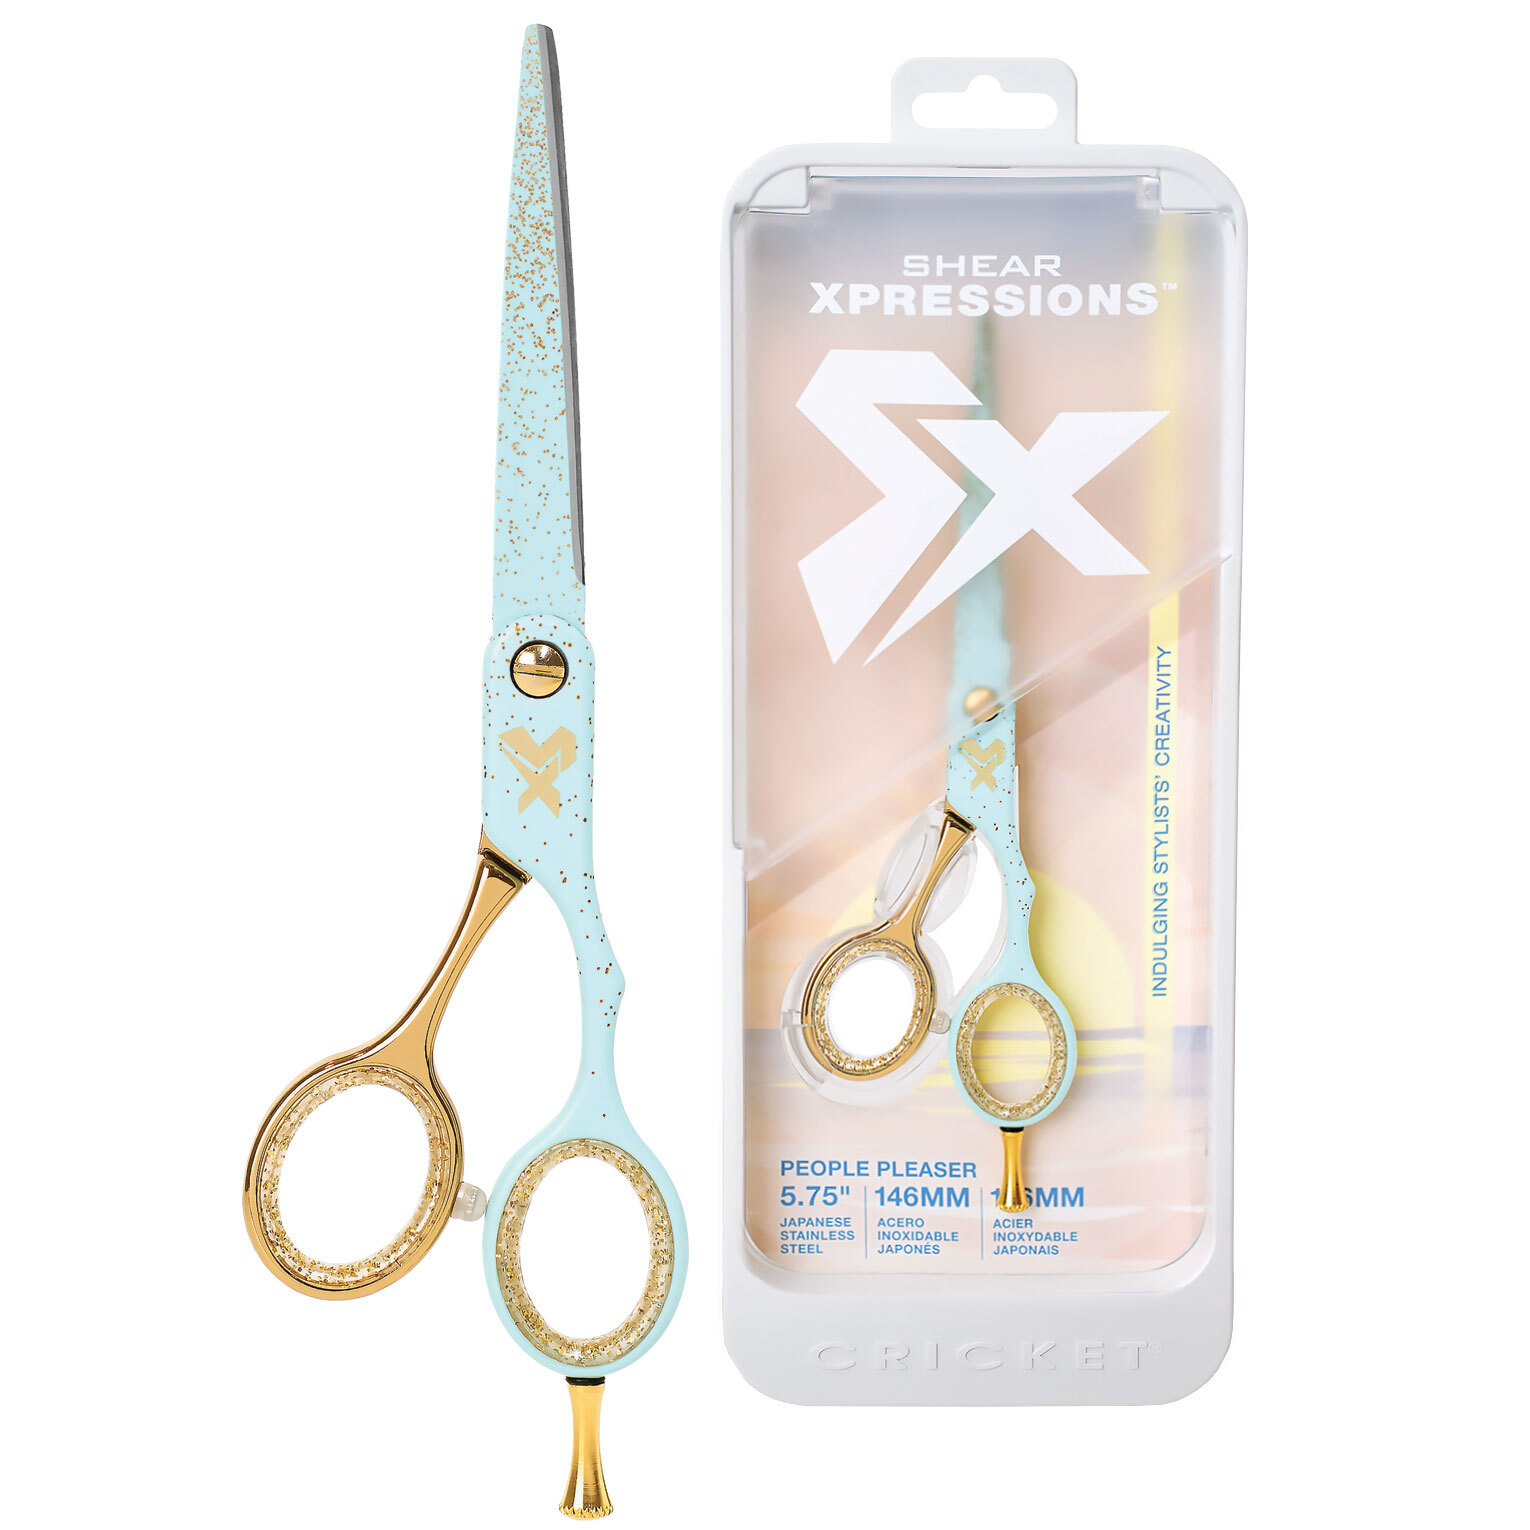 Cricket SHEARS: Shear Xpressions People Pleaser 5.75" Shear Hustle & Shine Collection